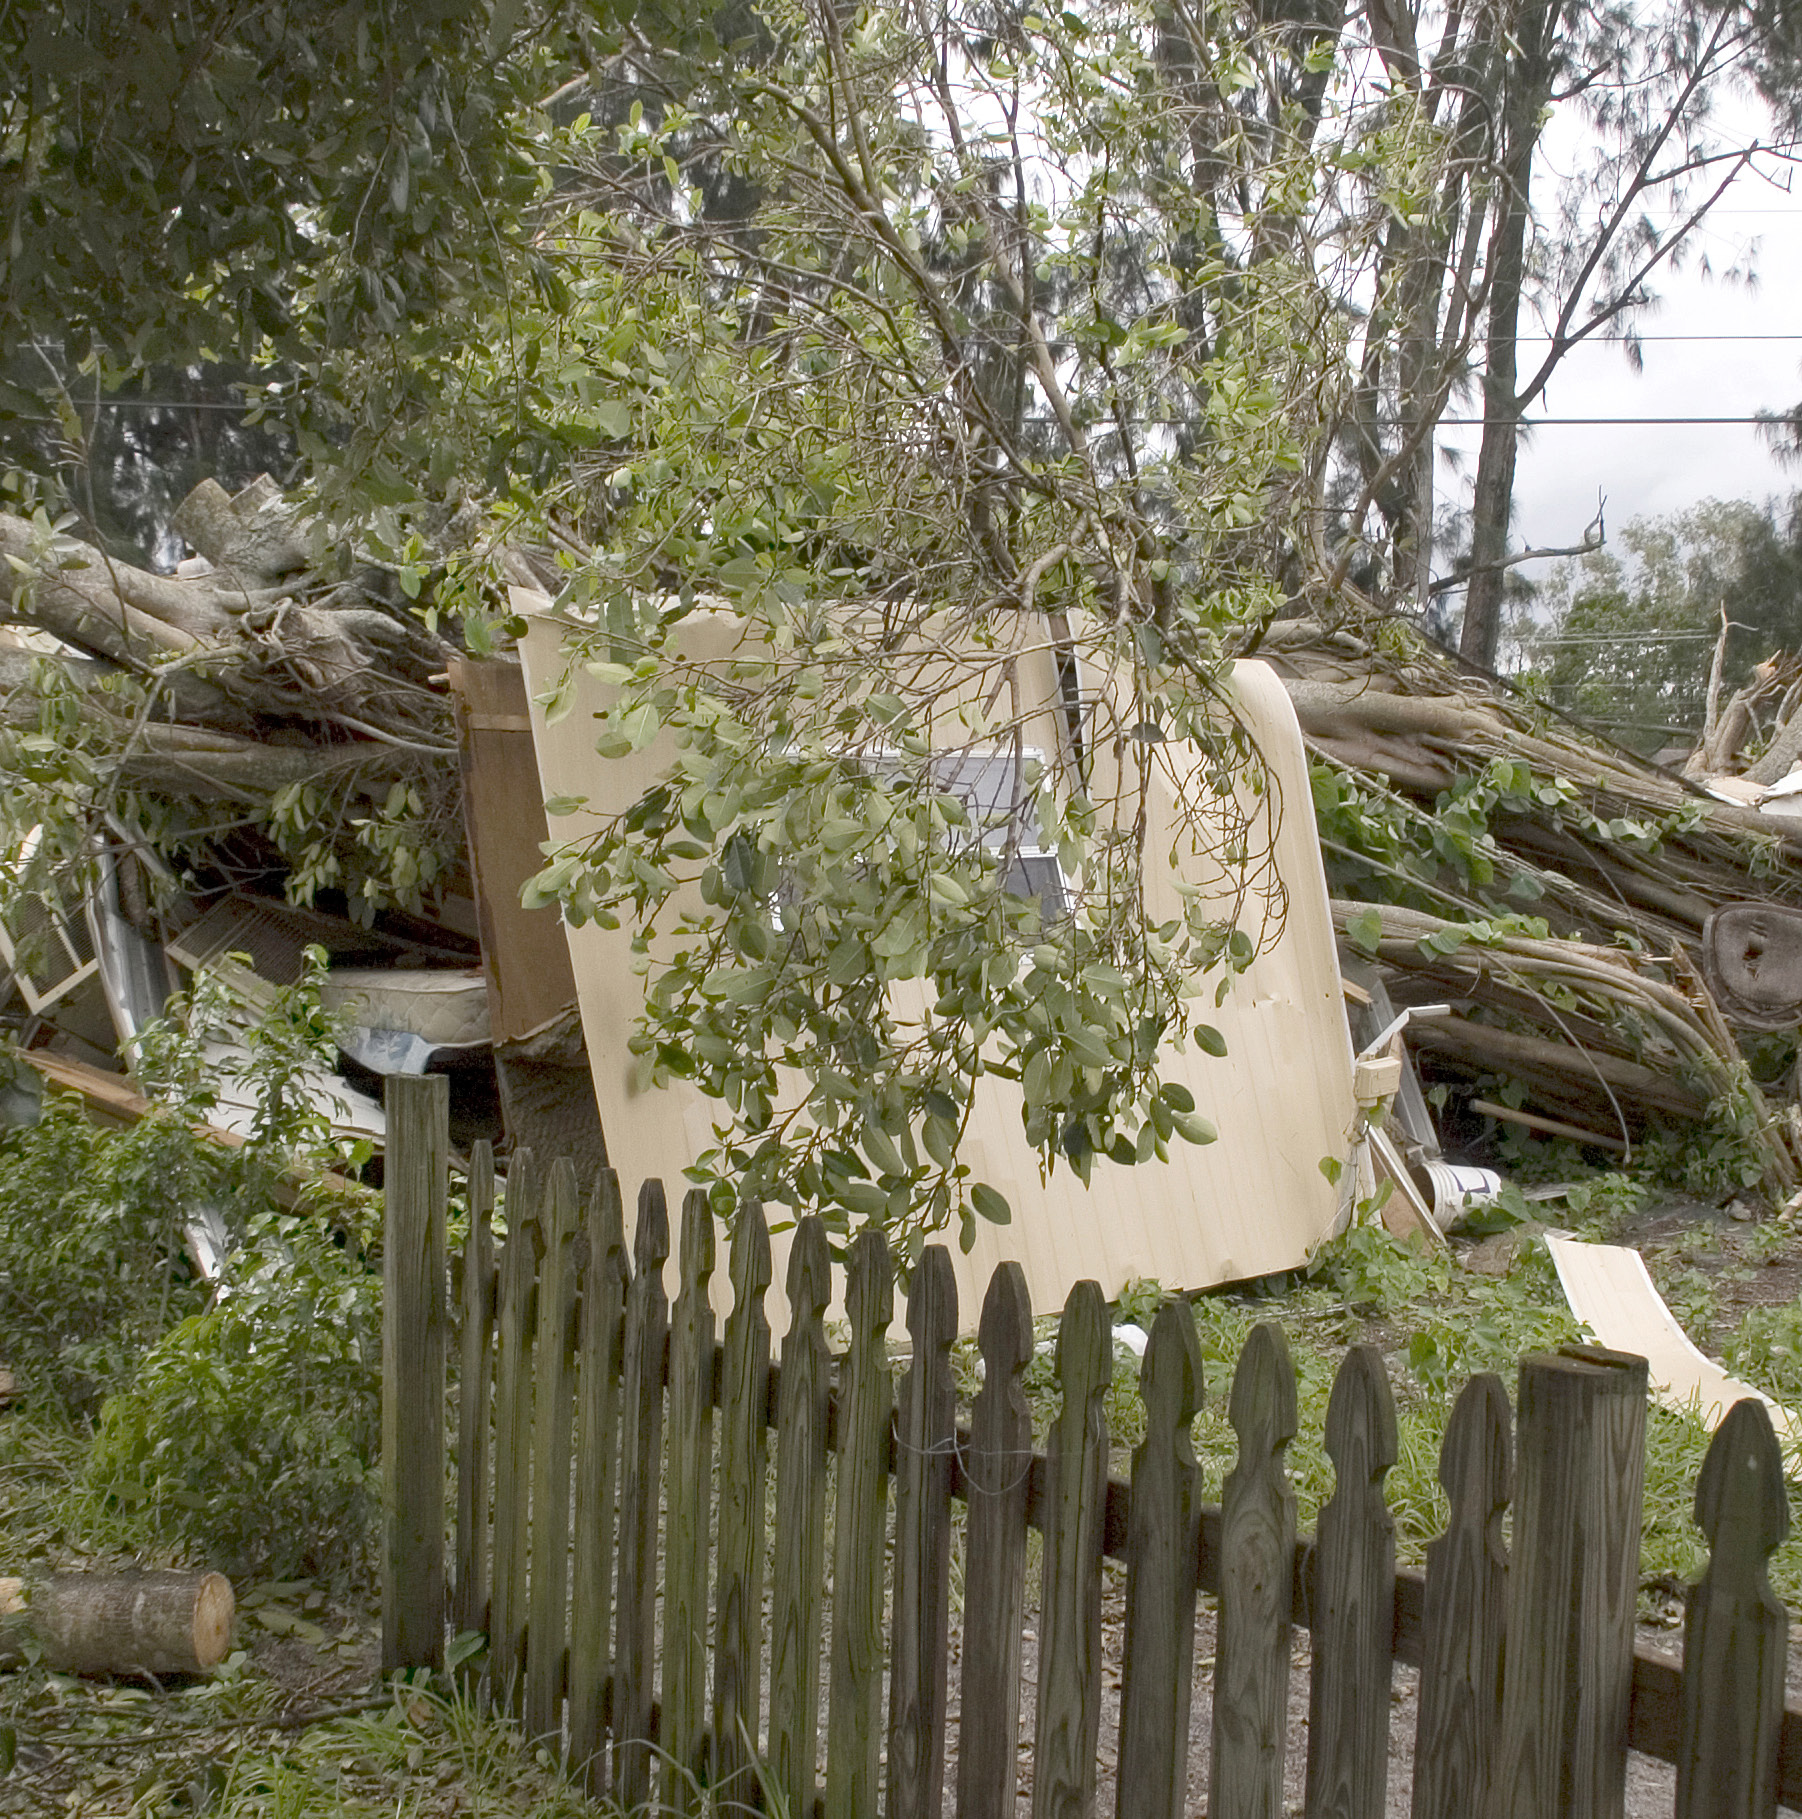 Damaged fence with debris and downed trees as a result of hurricane wind from Katrina.